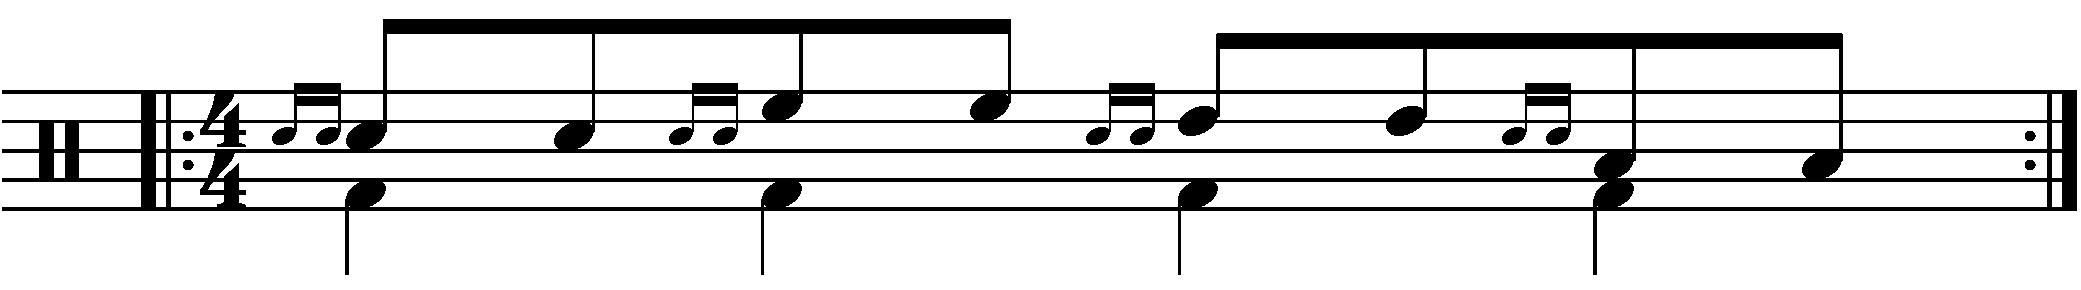 Drag tap with moving standard notes